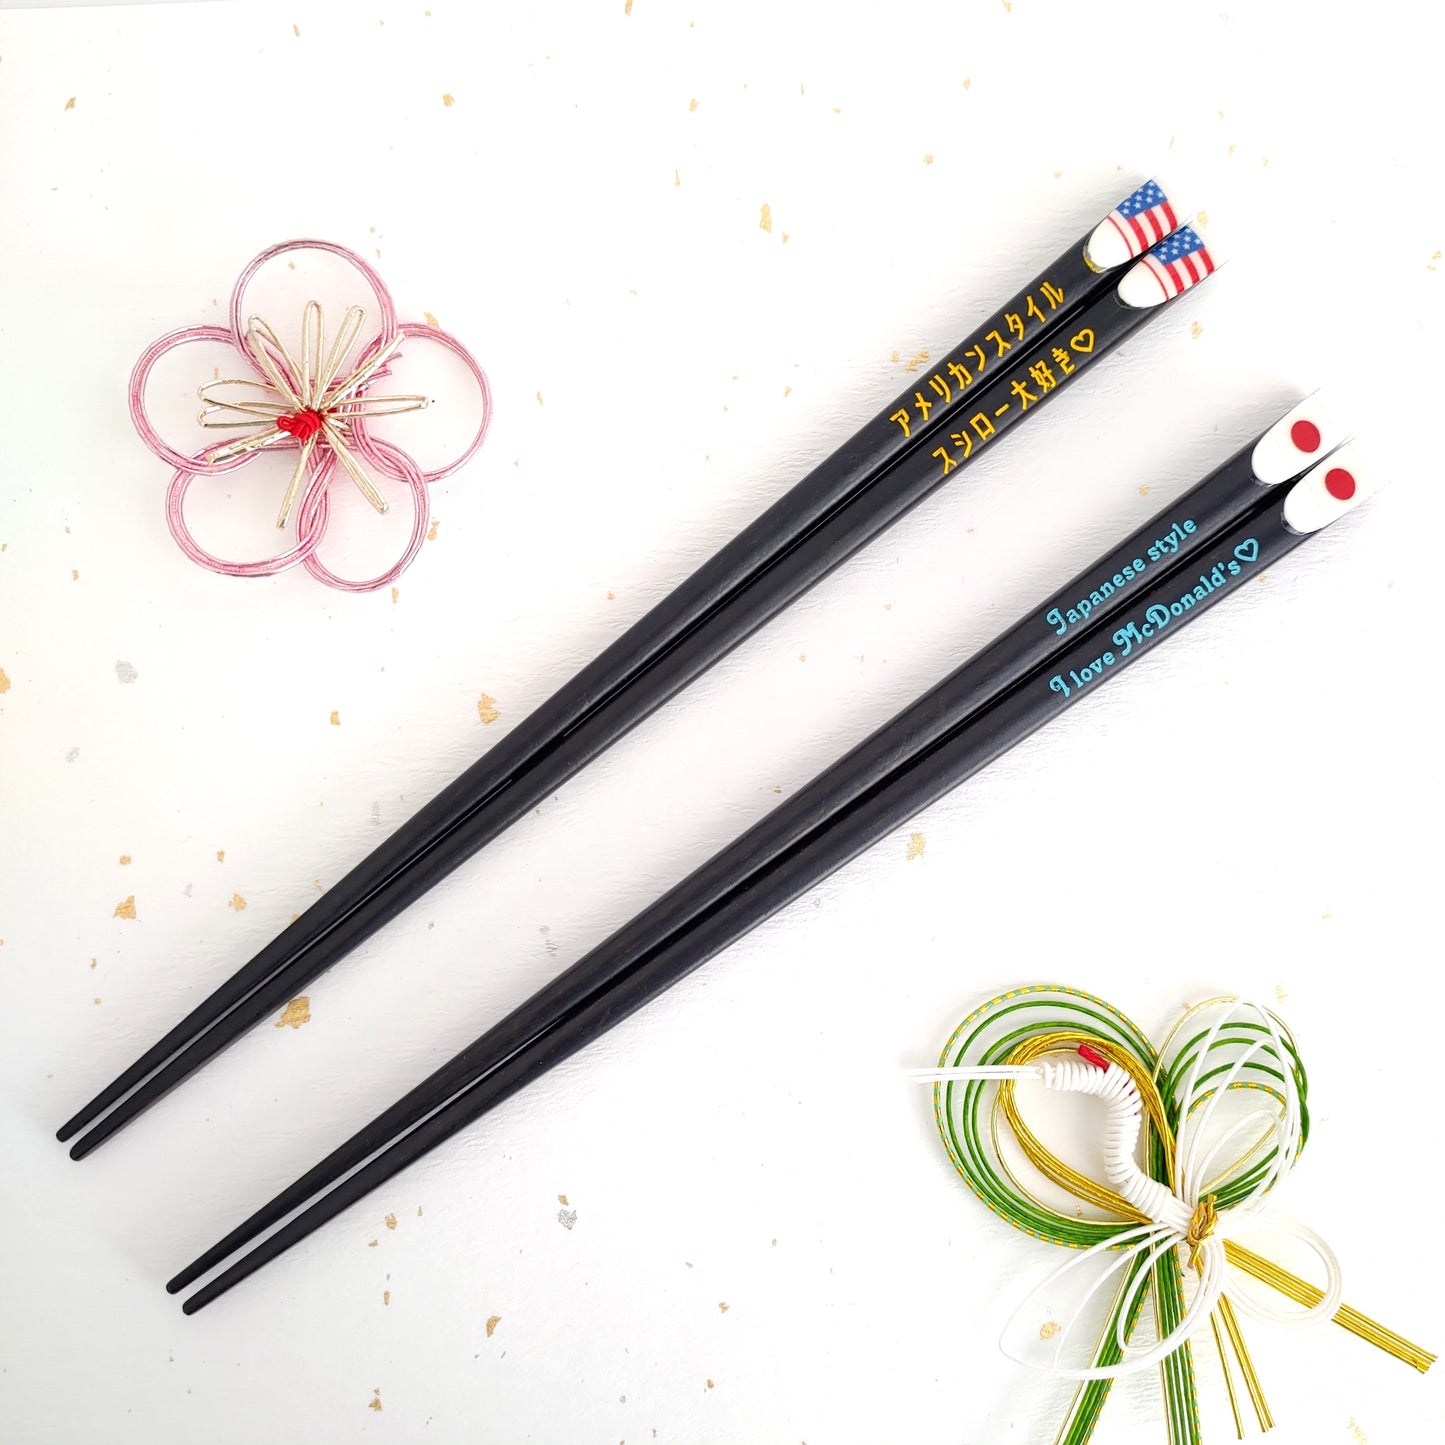 Swell Japanese chopsticks with american and japan flags - DOUBLE PAIR WITH ENGRAVED WOODEN BOX SET